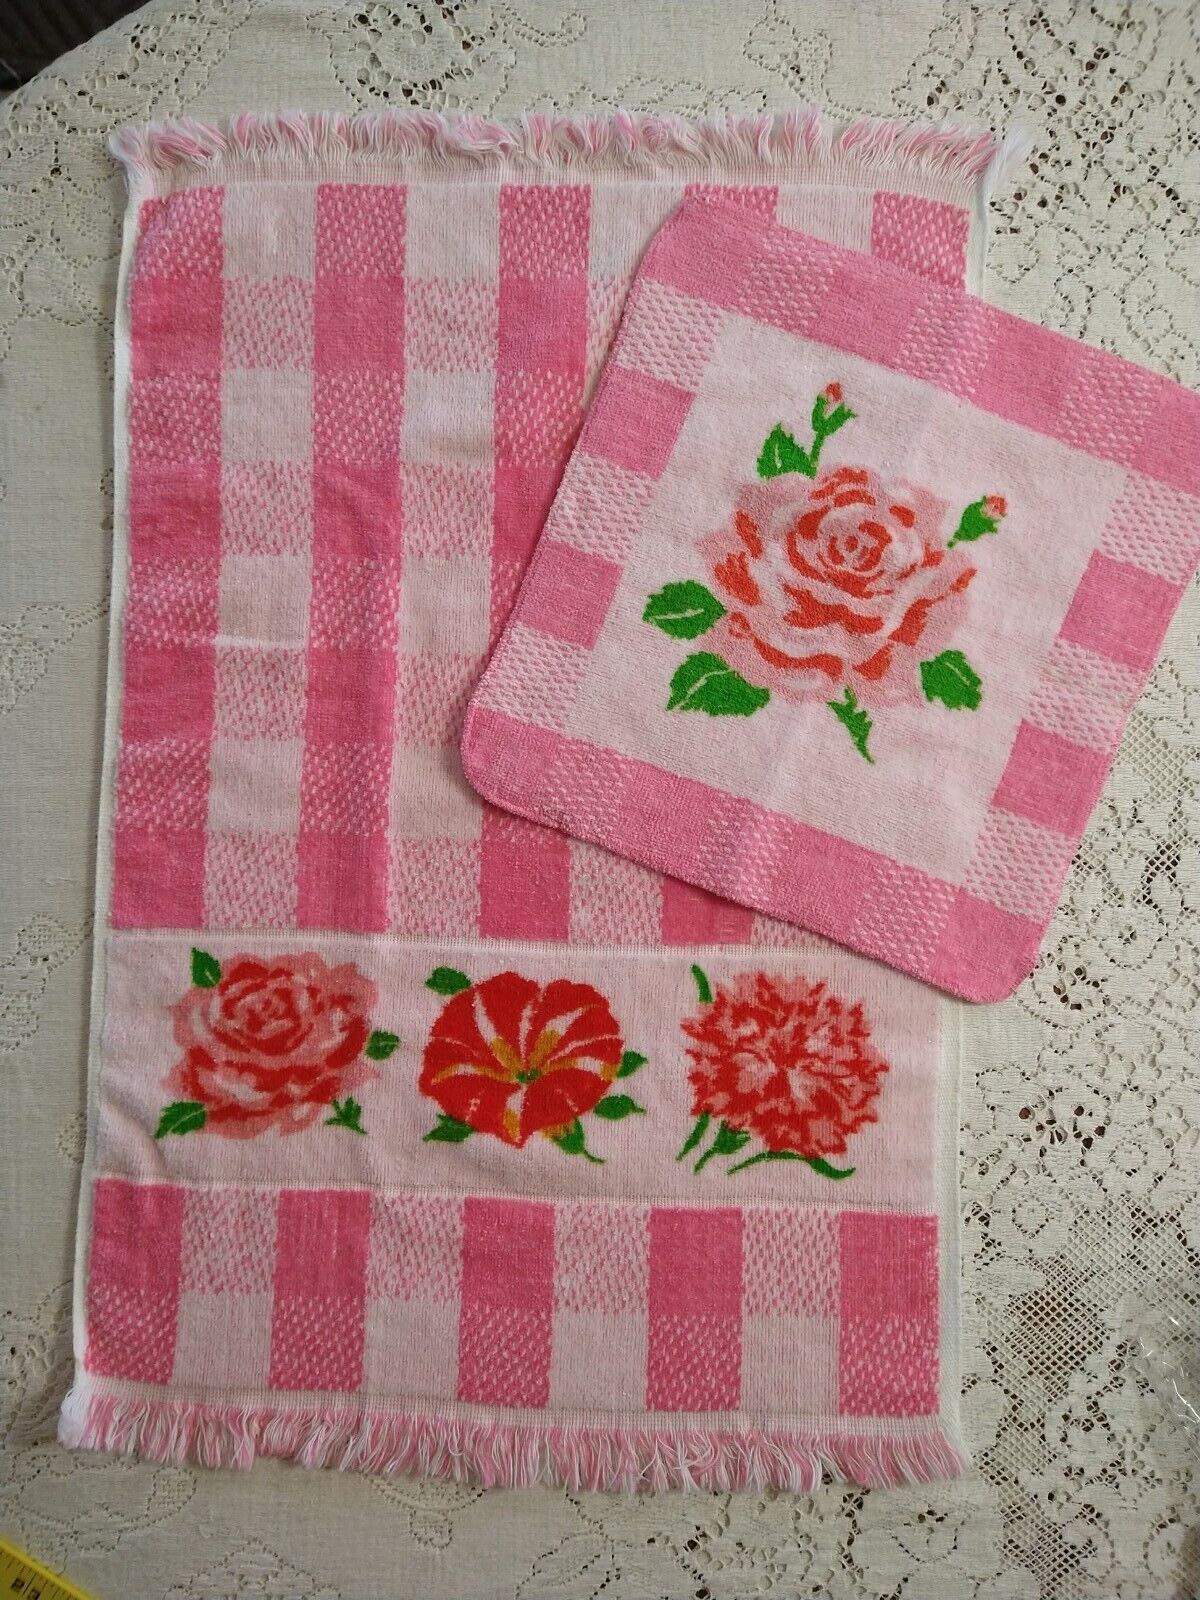 2 Pc Set Vintage 70s Lady Pepperell Pink CHECK PLAID FLORAL HAND TOWEL Washcloth